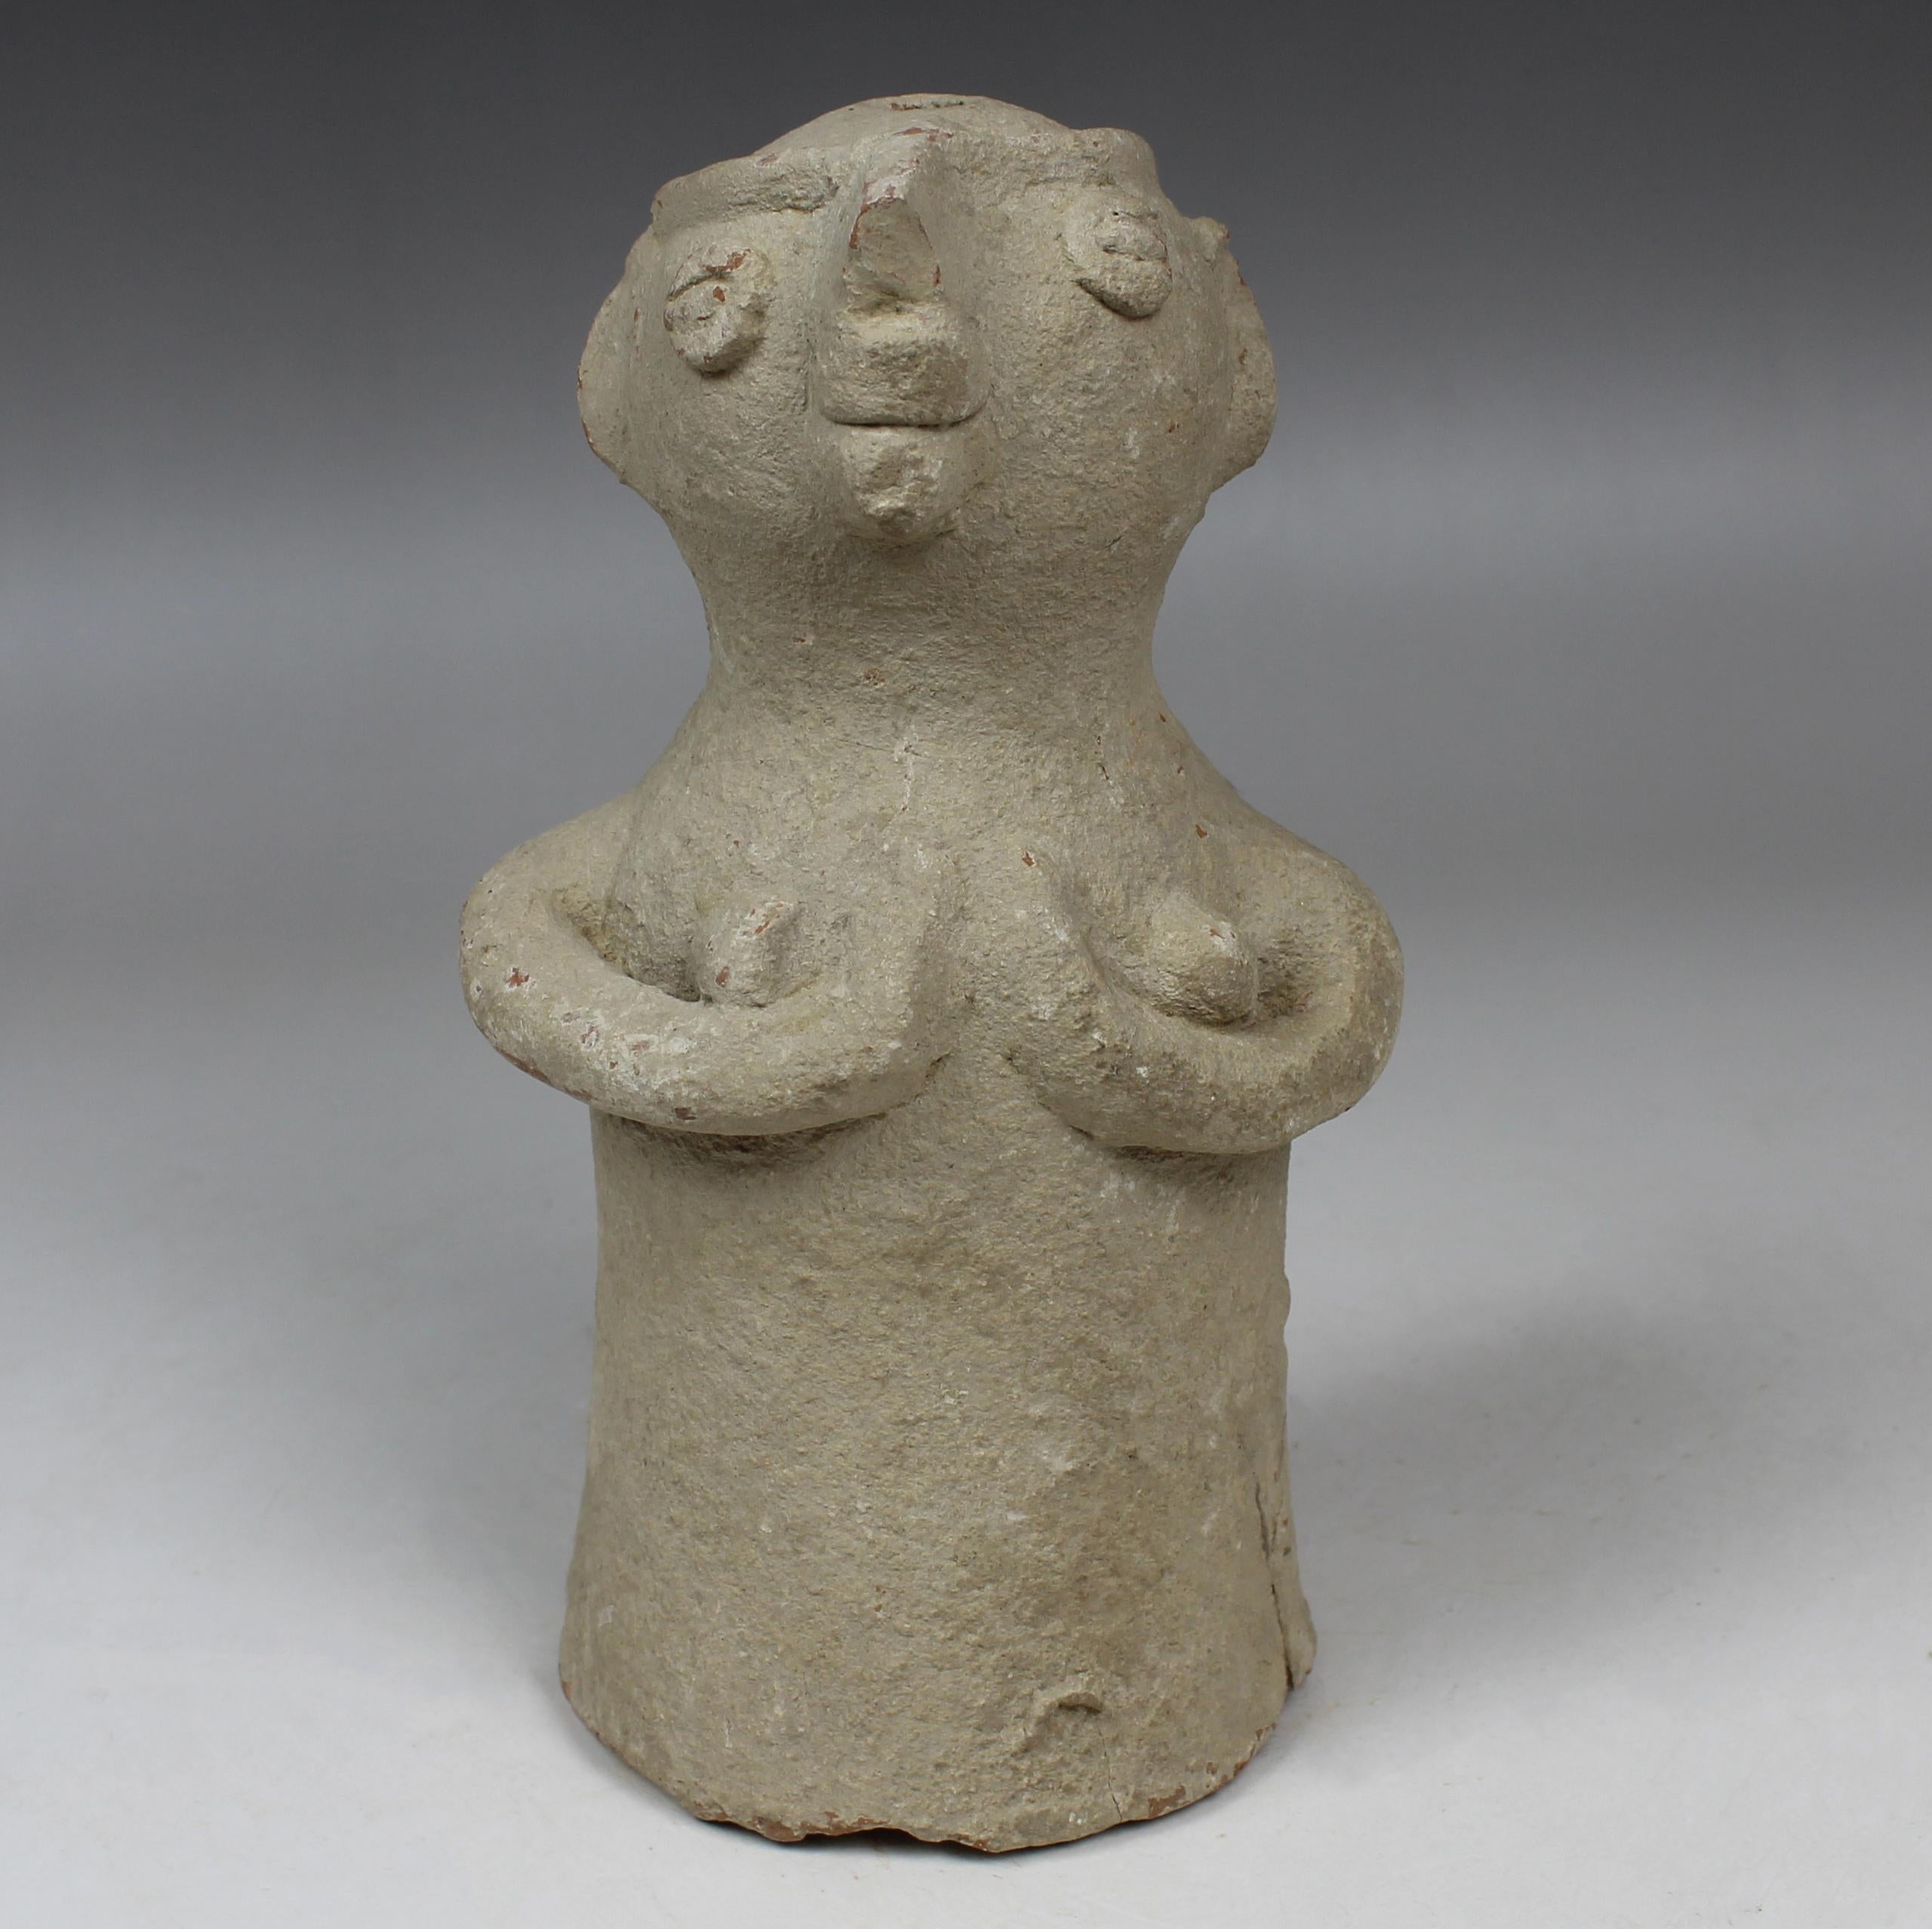 ITEM: Figurine of fertility goddess
MATERIAL: Pottery
CULTURE: Bronze Age, Indus Valley
PERIOD: 3000 – 2000 B.C
DIMENSIONS: 150 mm x 76 mm
CONDITION: Good condition, repaired
PROVENANCE: Ex American private collection, acquired before 2000s

Comes